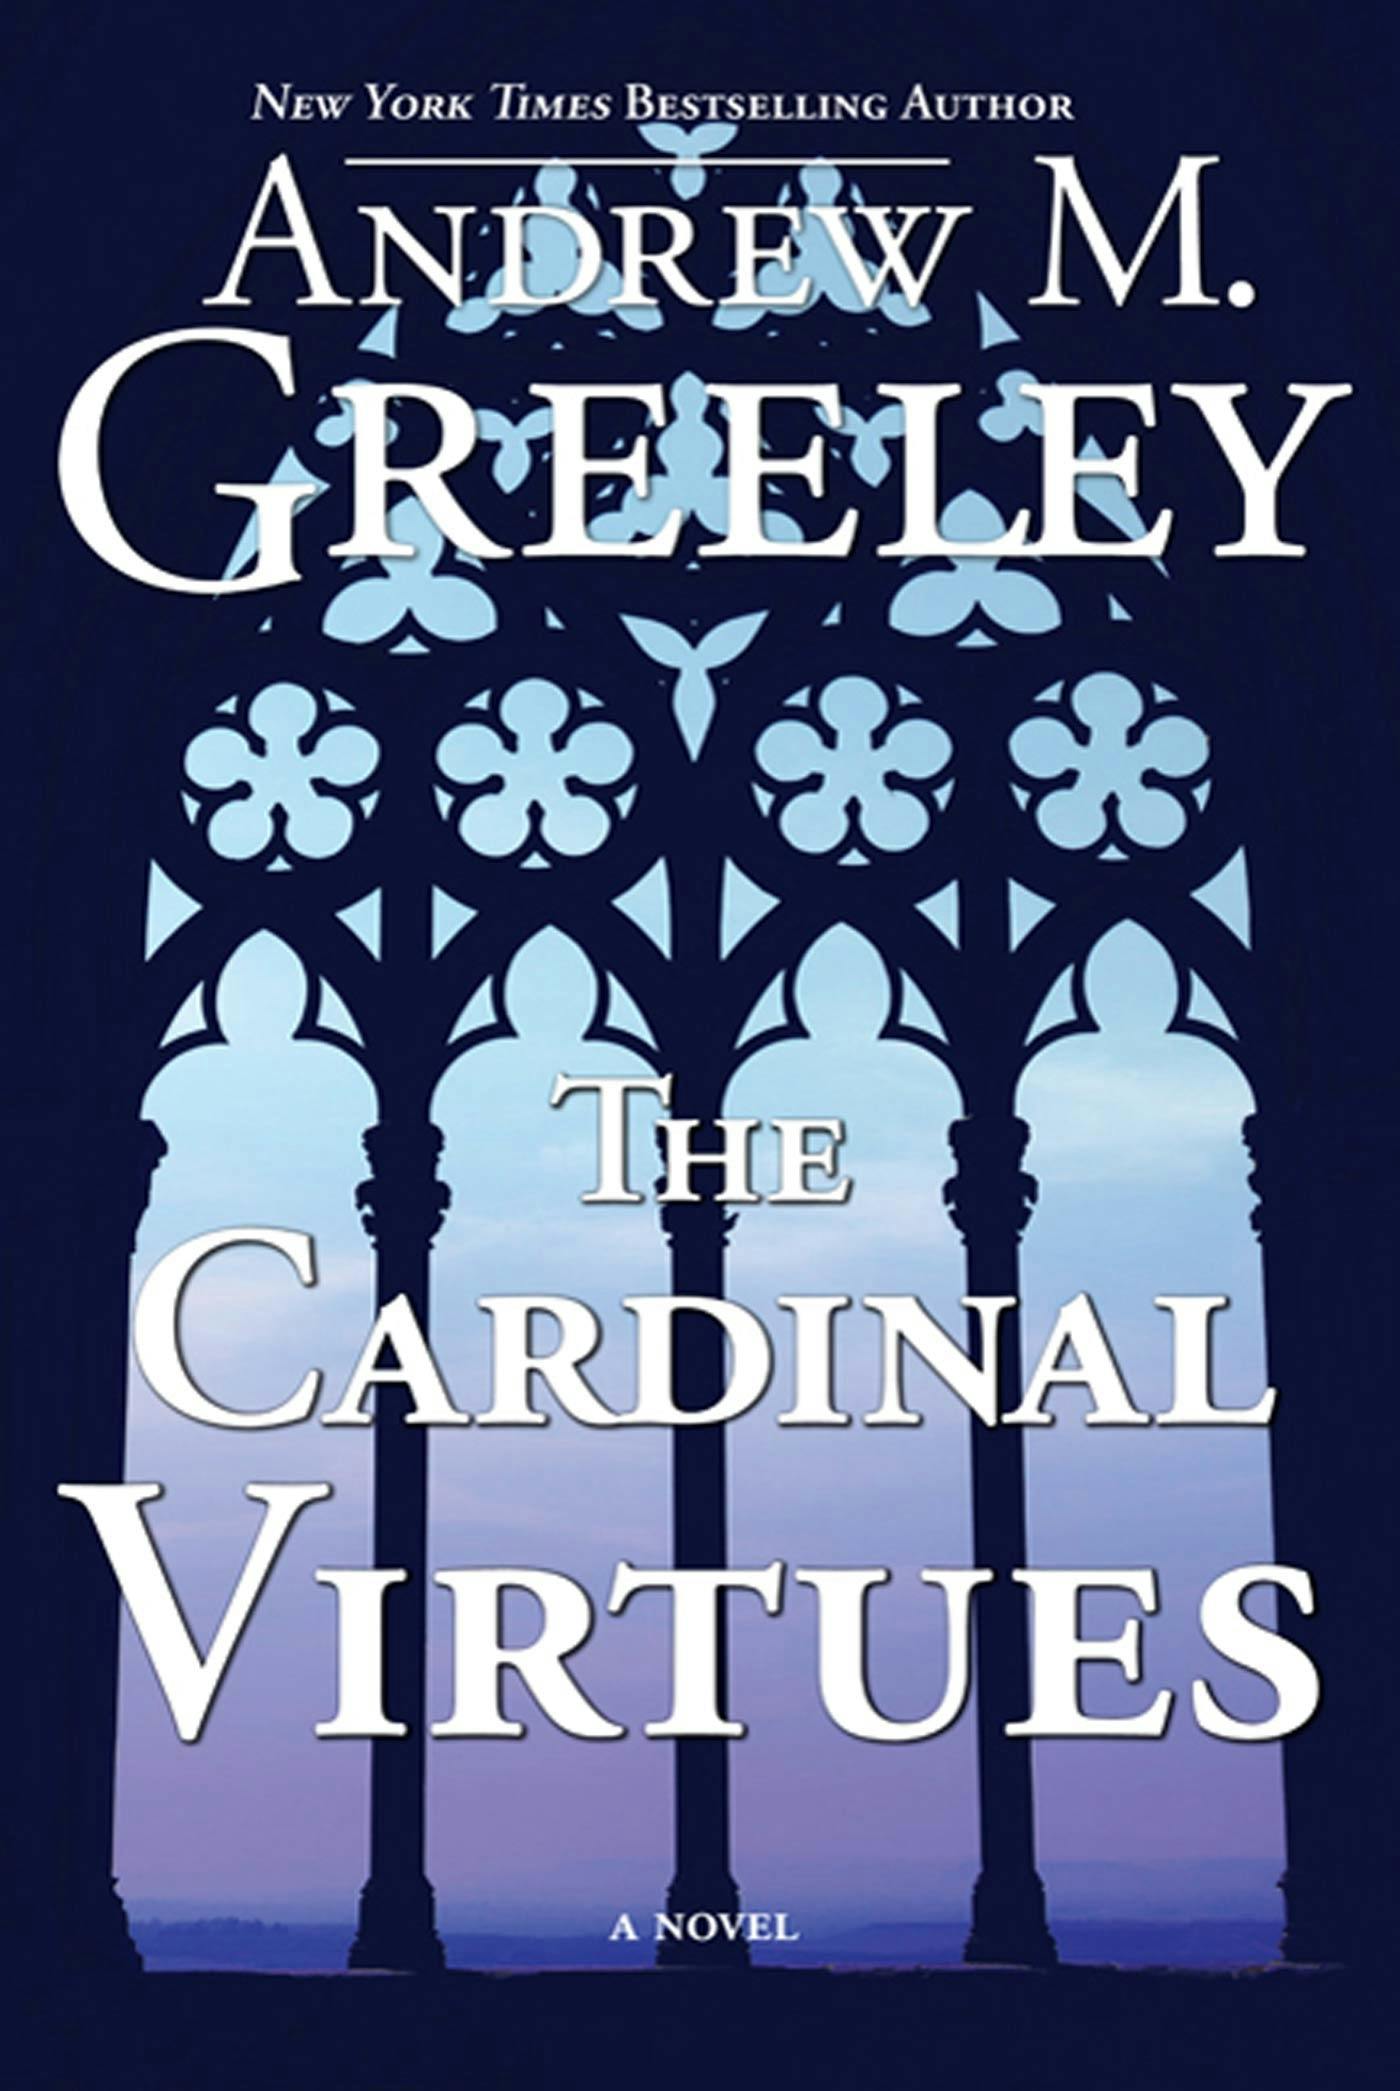 Cover for the book titled as: The Cardinal Virtues